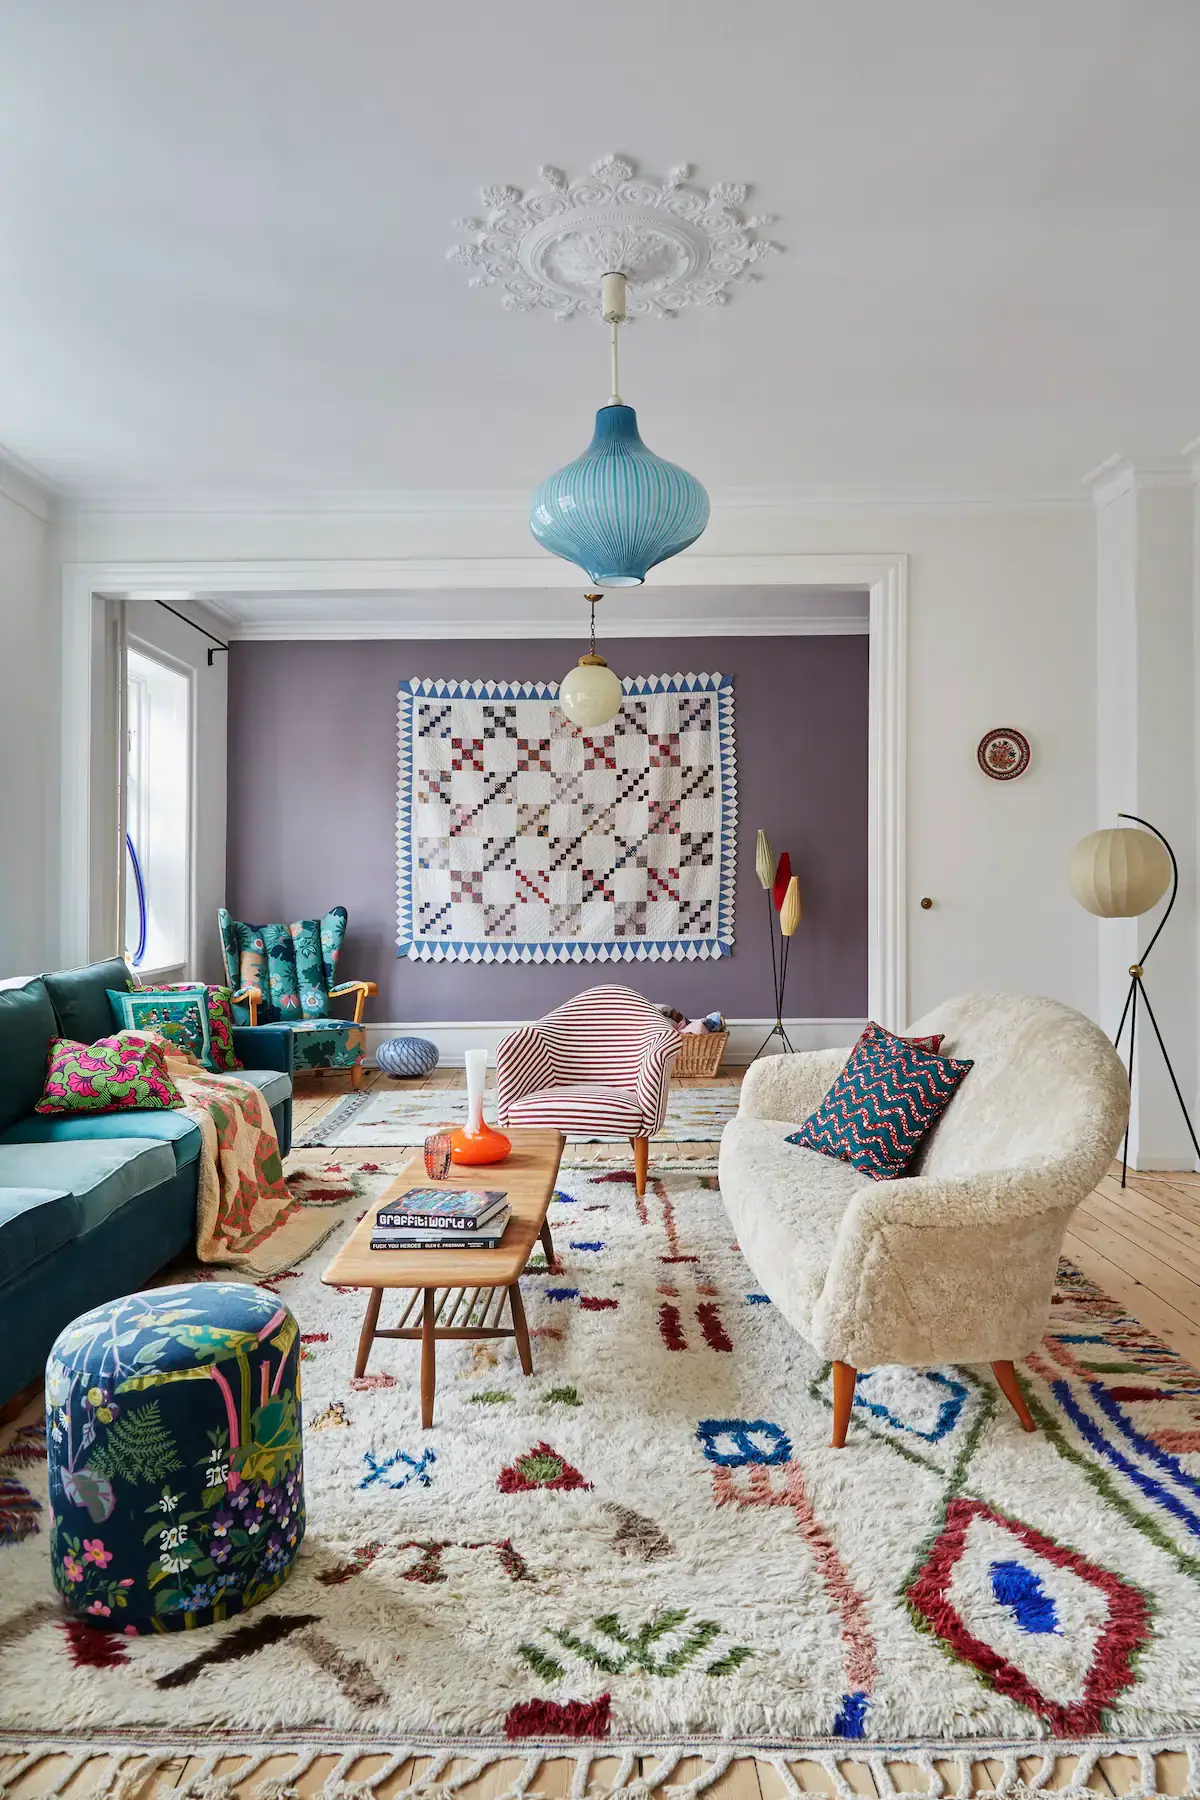 You Can Stay in This Colorful Design Apartment in Copenhagen